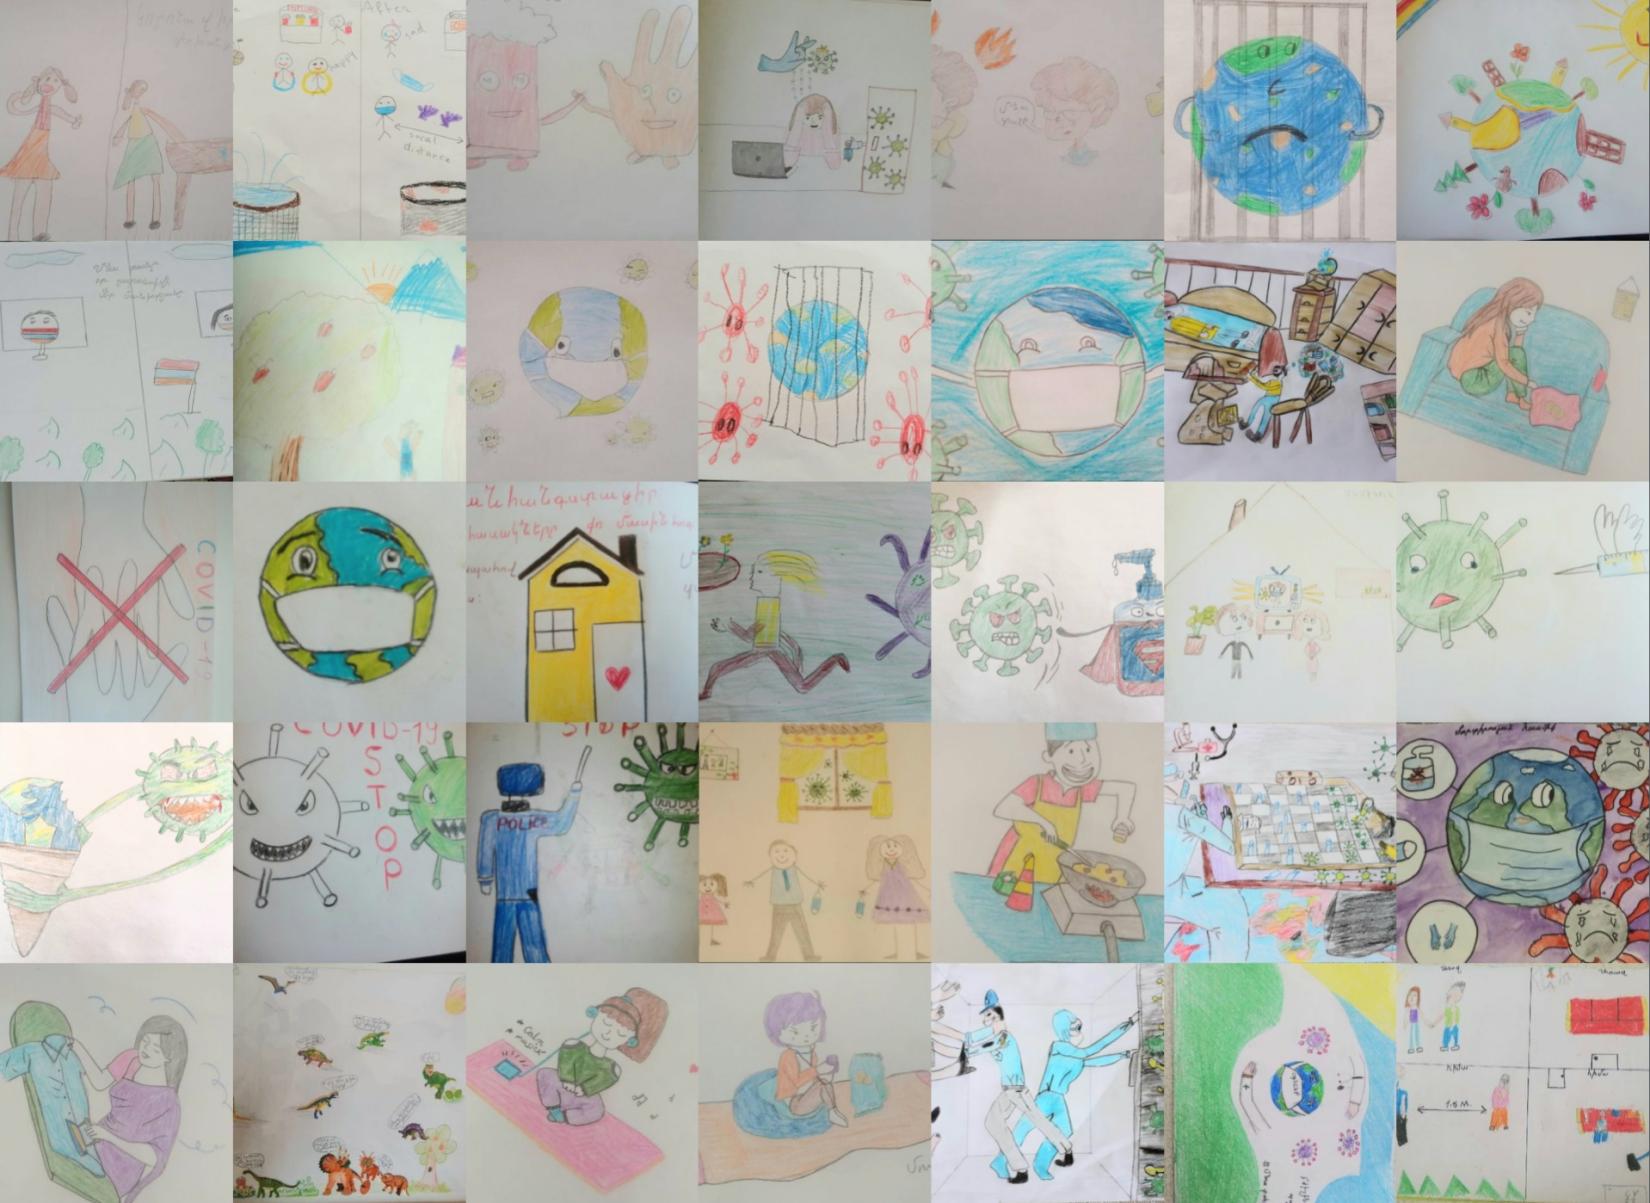 The children's masterpieces reflecting their life before, during and after coronavirus.